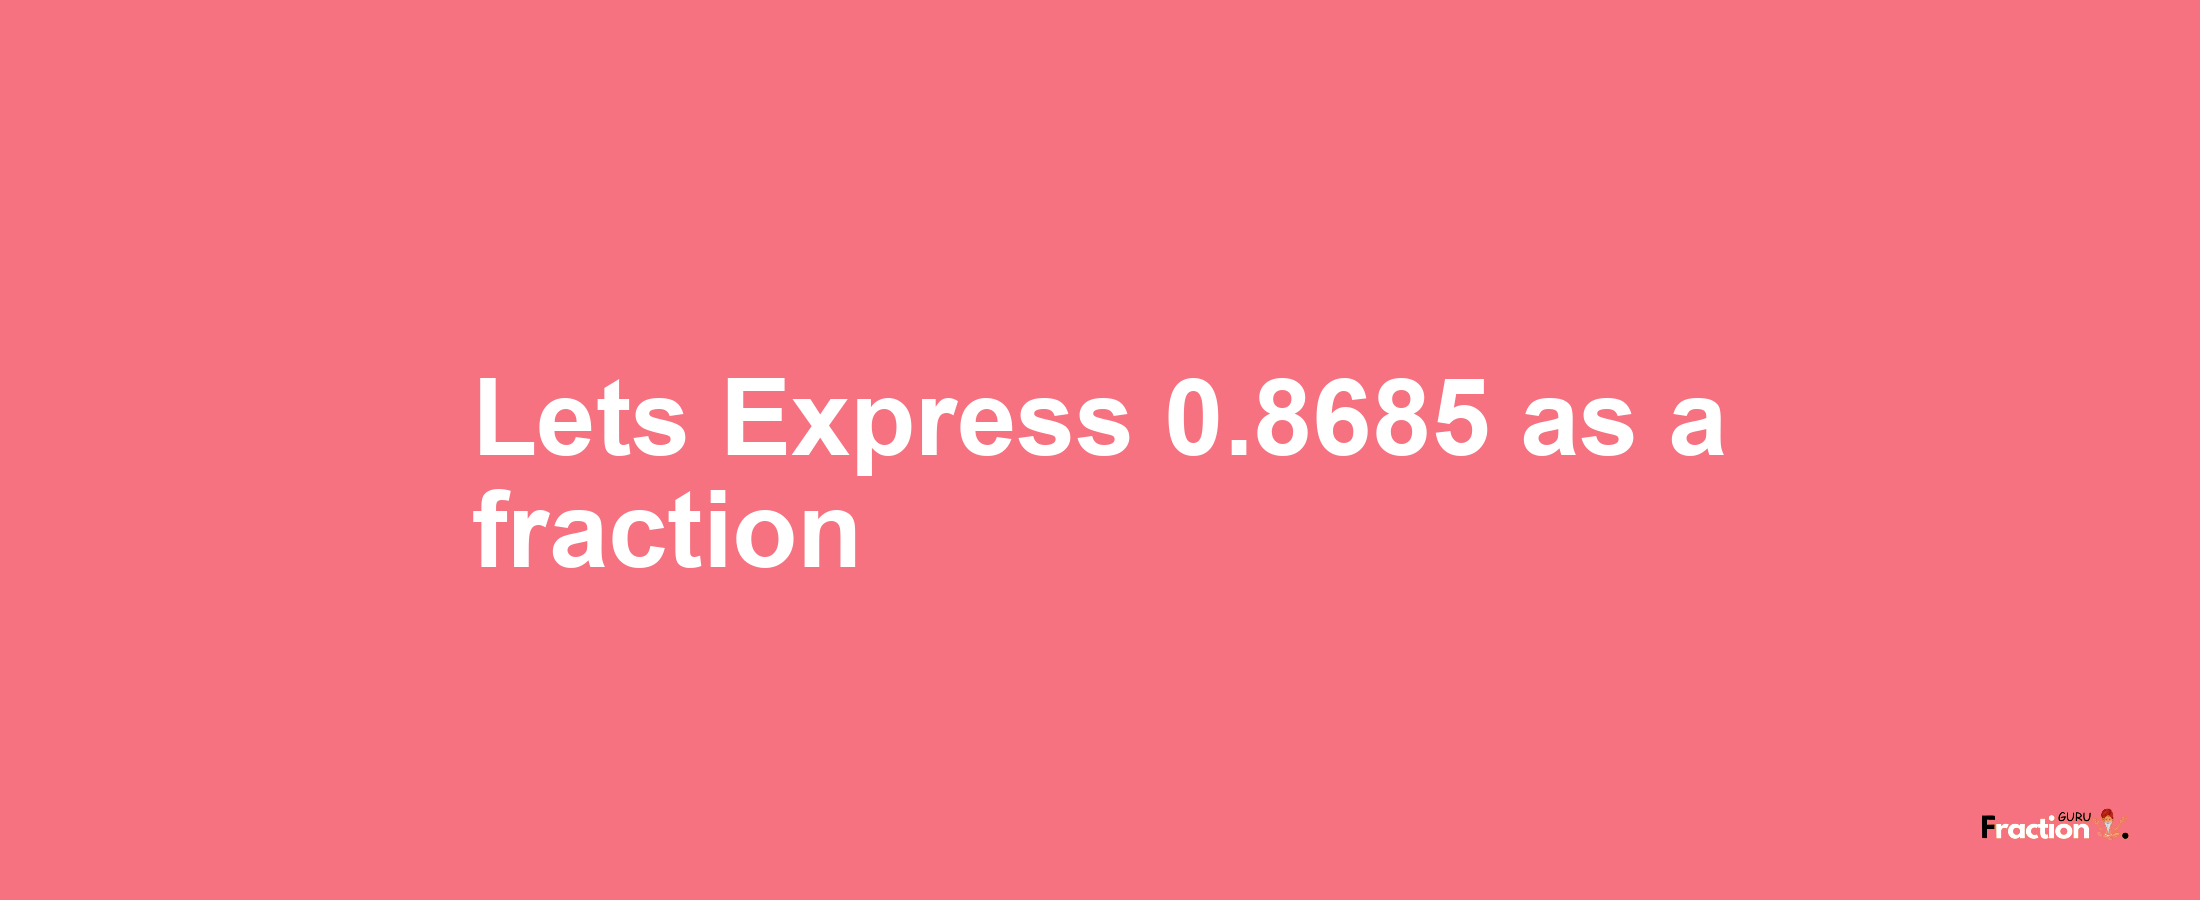 Lets Express 0.8685 as afraction